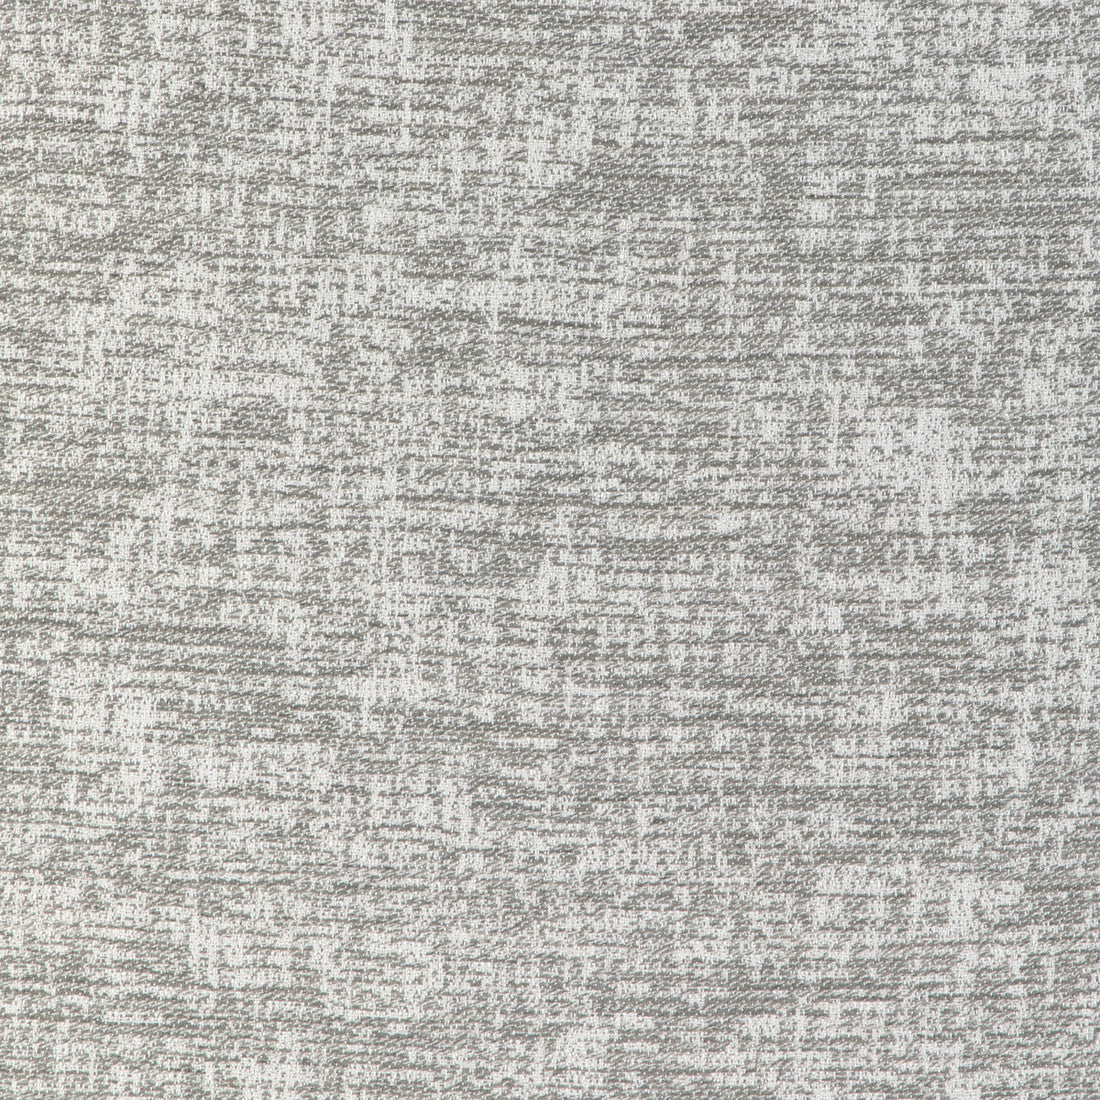 Seadrift fabric in driftwood color - pattern 36919.11.0 - by Kravet Couture in the Riviera collection